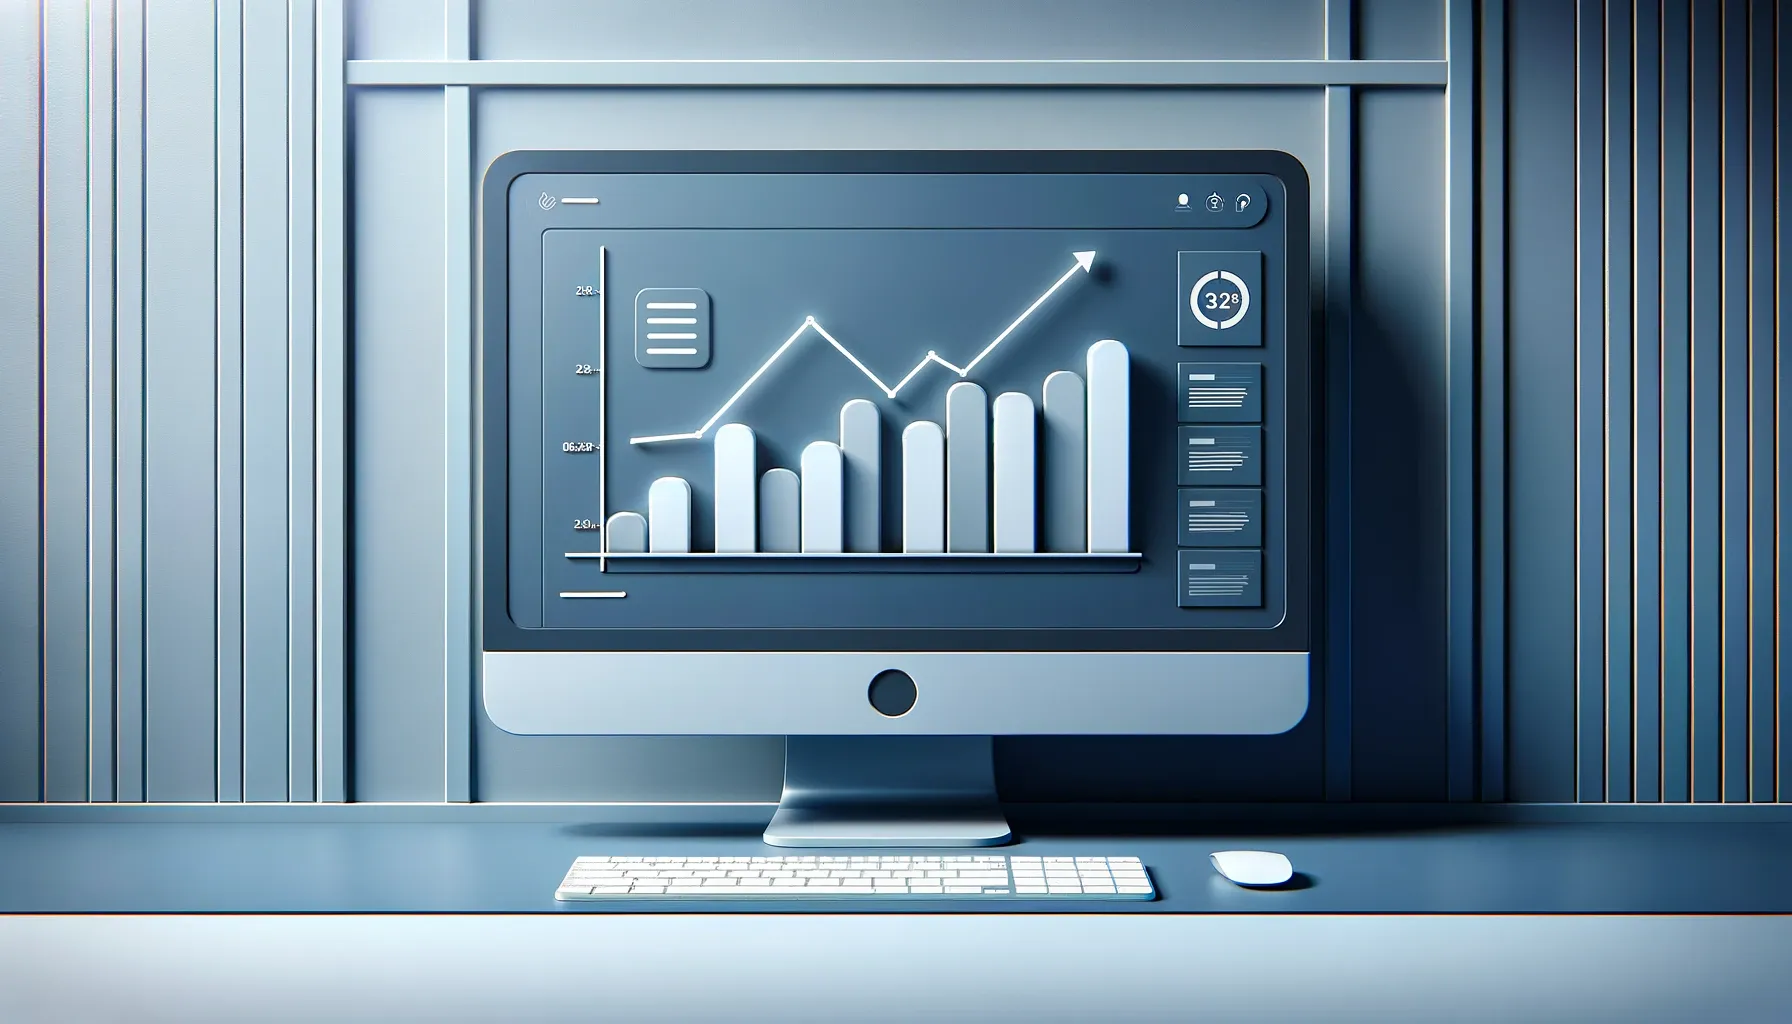 Stylized image of a computer monitor displaying a 3D graph chart representing data analysis on a sleek blue background.